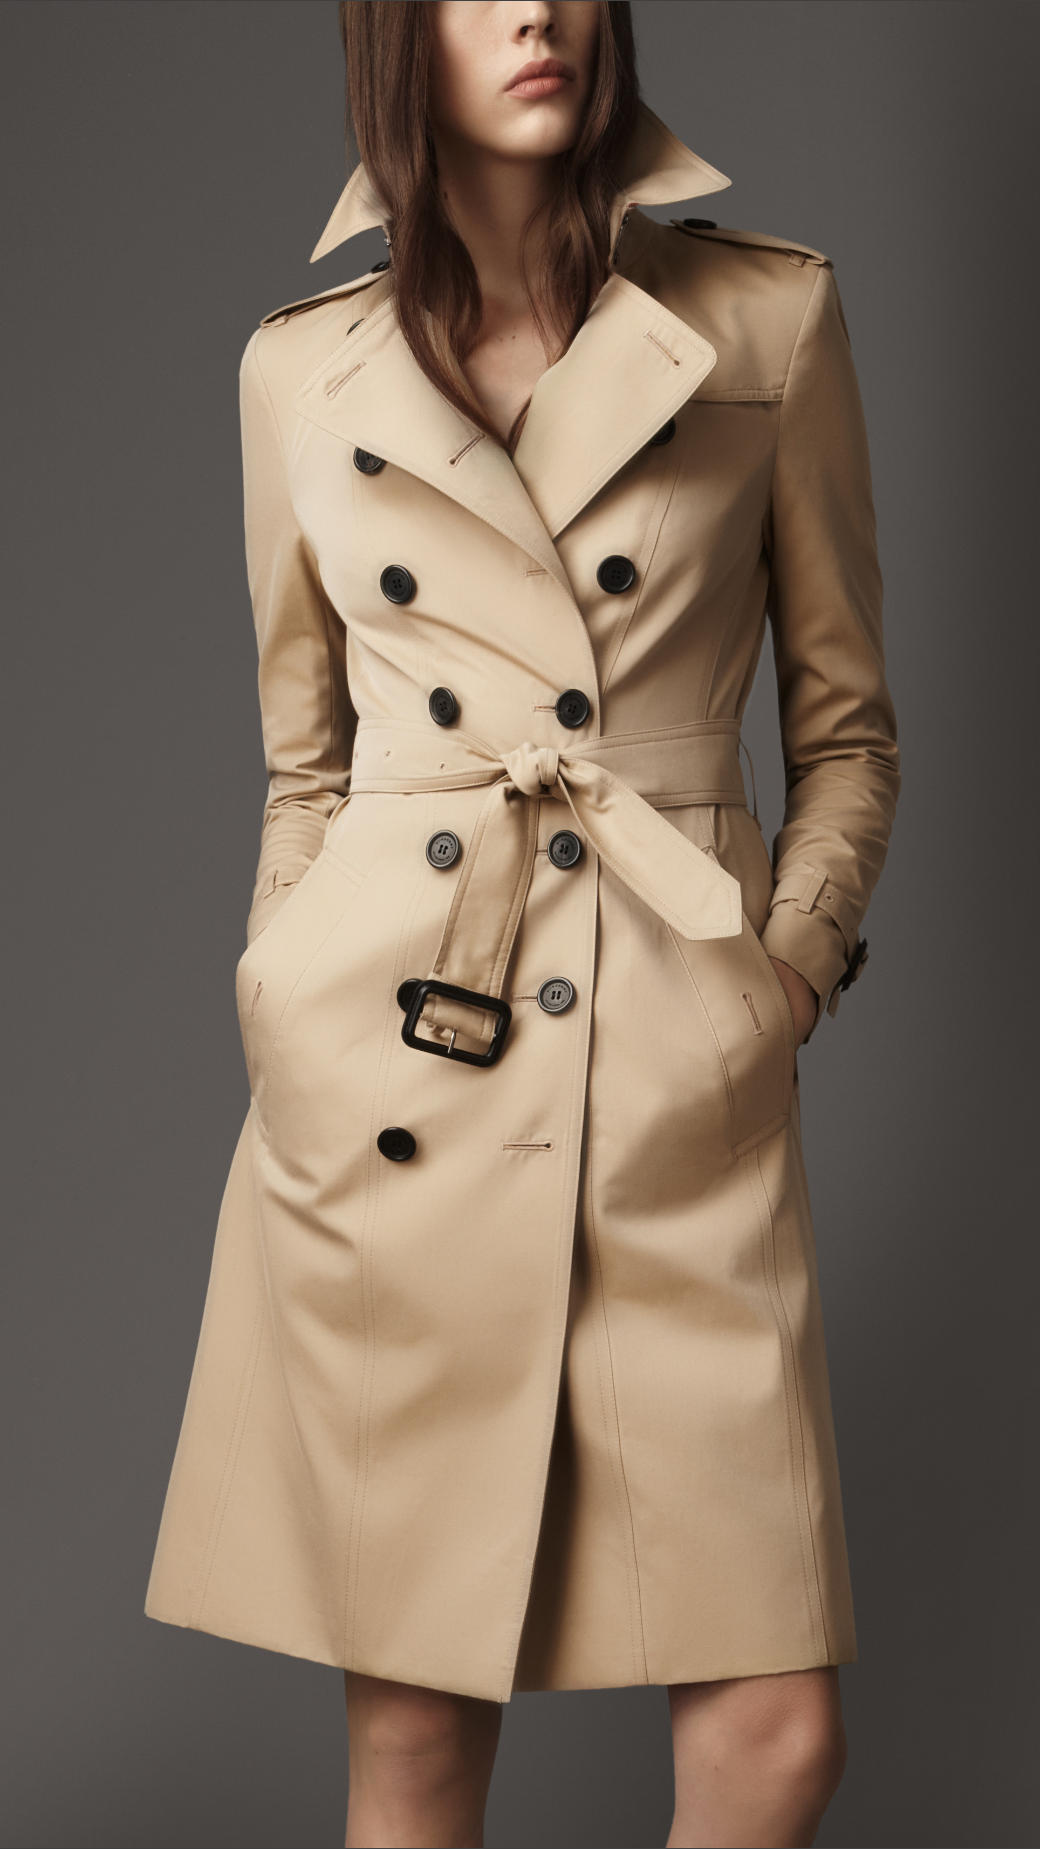 Lyst - Burberry Trench Coat in Brown